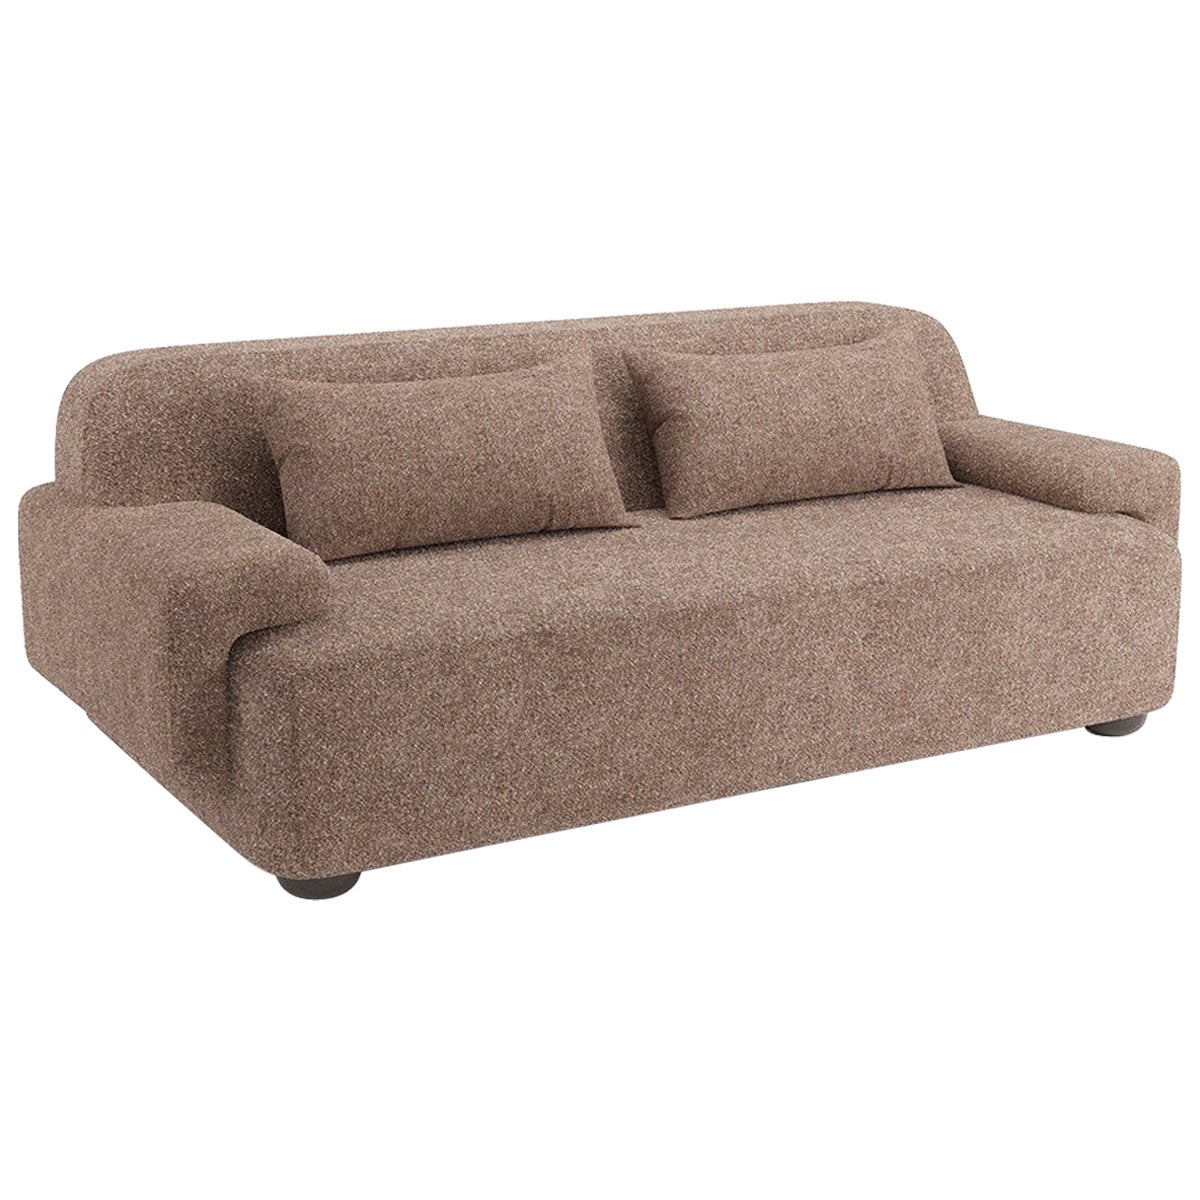 Popus Editions Lena 4 Seater Sofa in Mole Taupe Antwerp Linen Upholstery